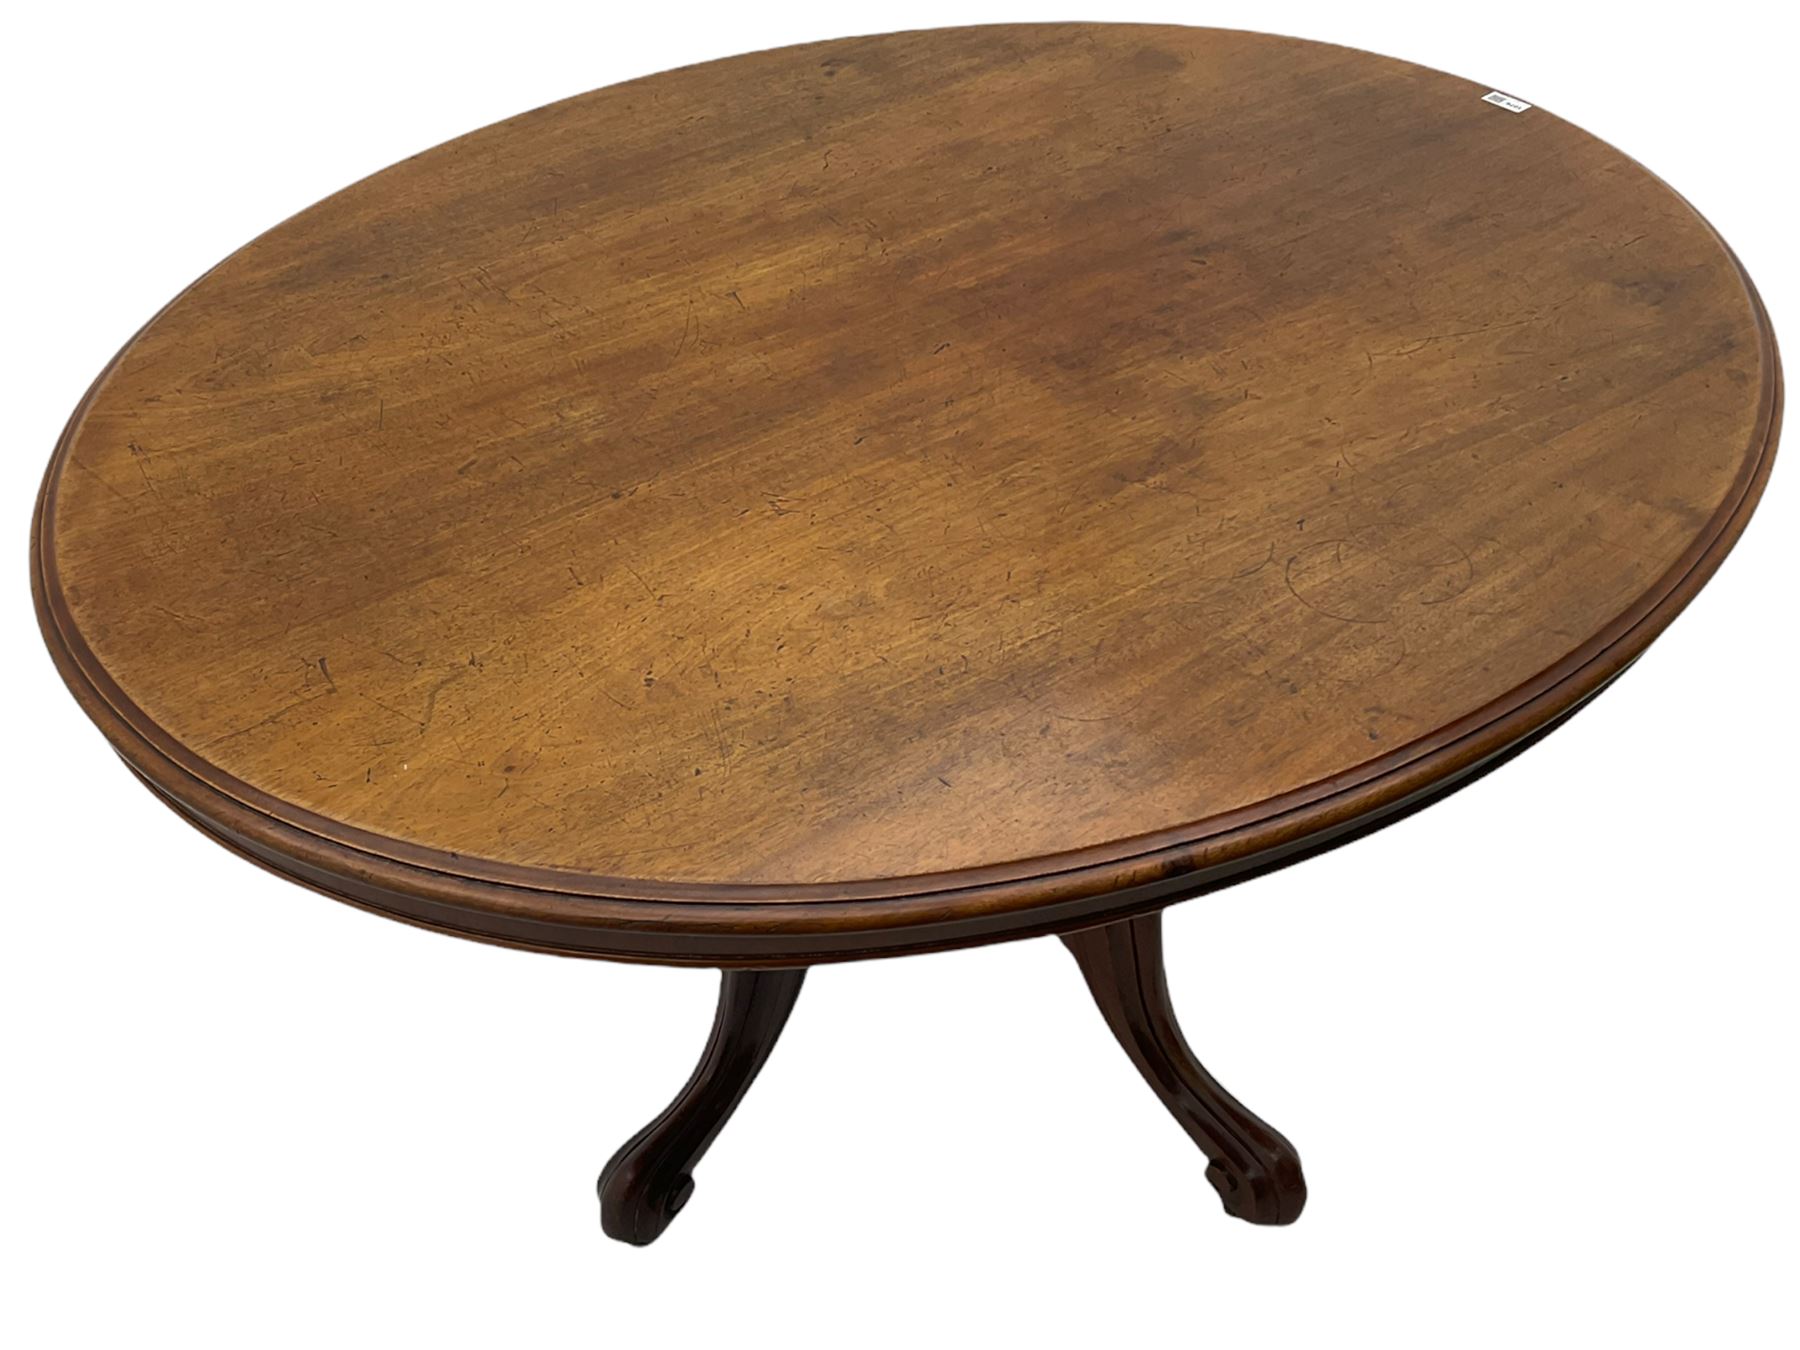 Victorian oval loo centre table - Image 4 of 5